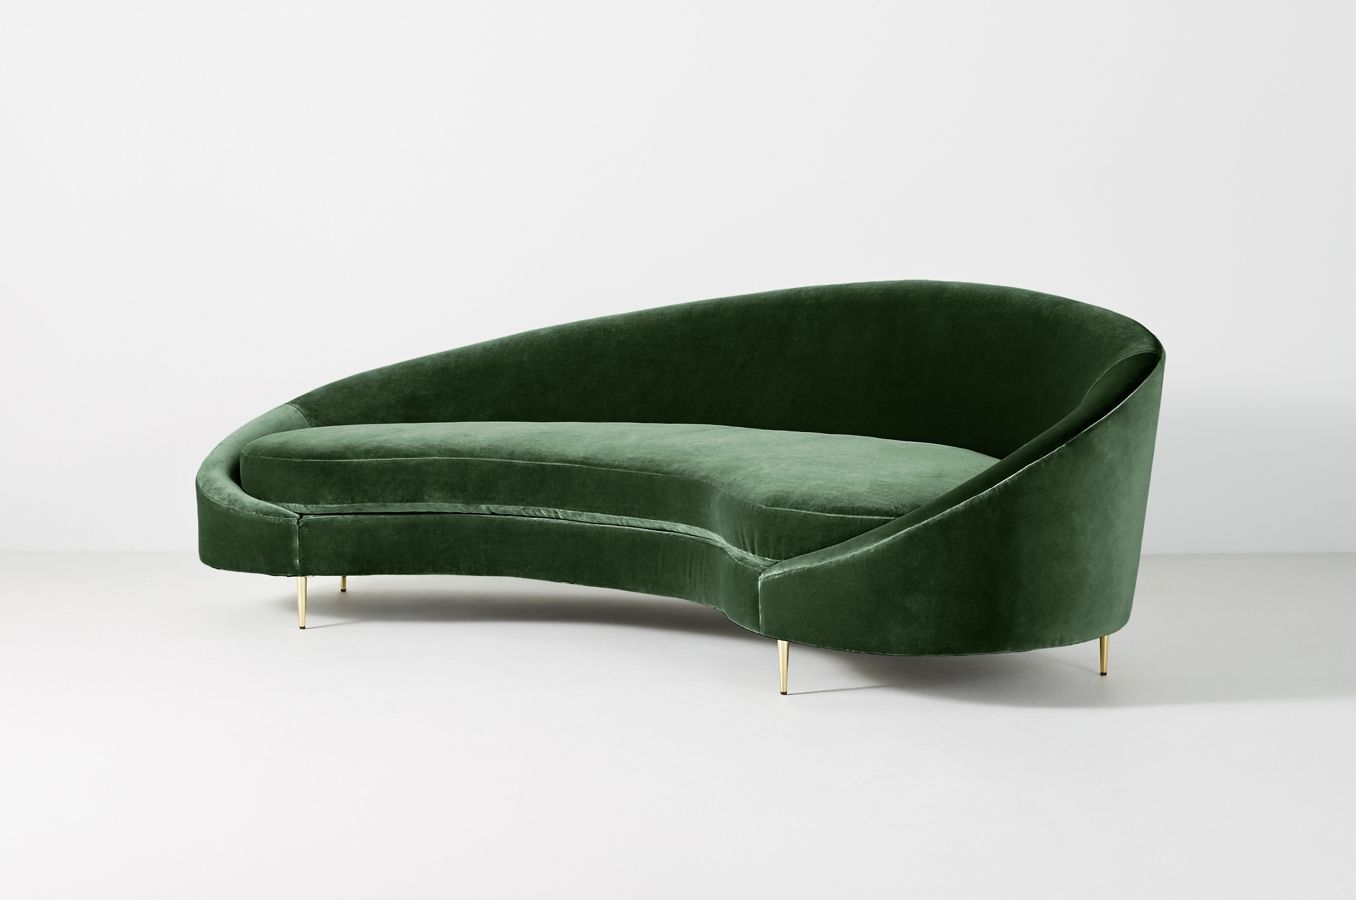 Asymmetrical Serpentine Sofa By Anthropologie in Green - Image 0